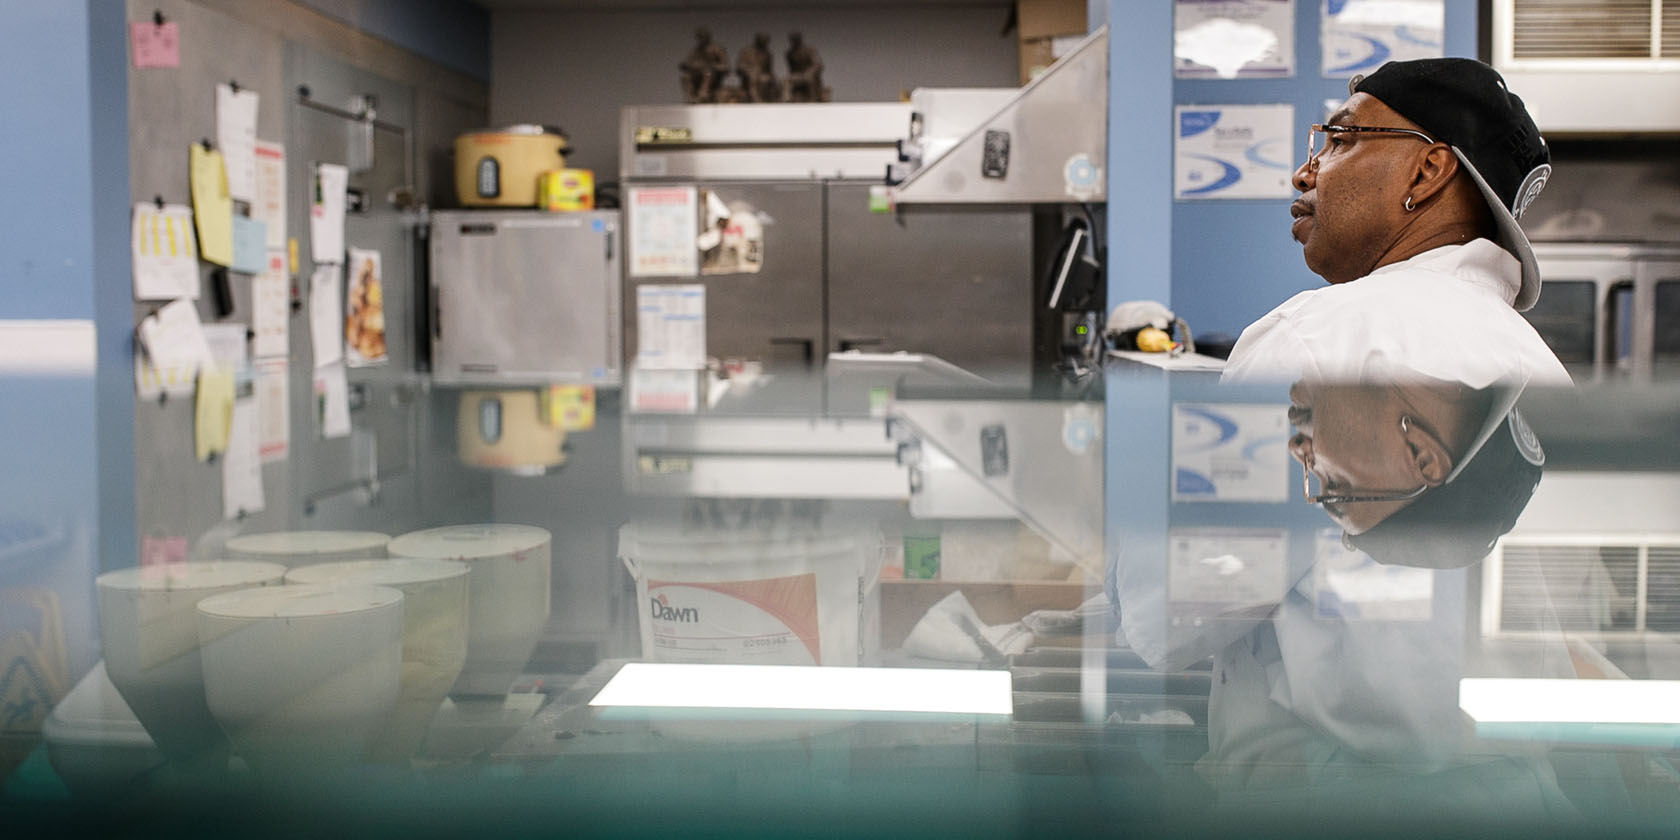 A man looks over the counter in an industrial kitchen.